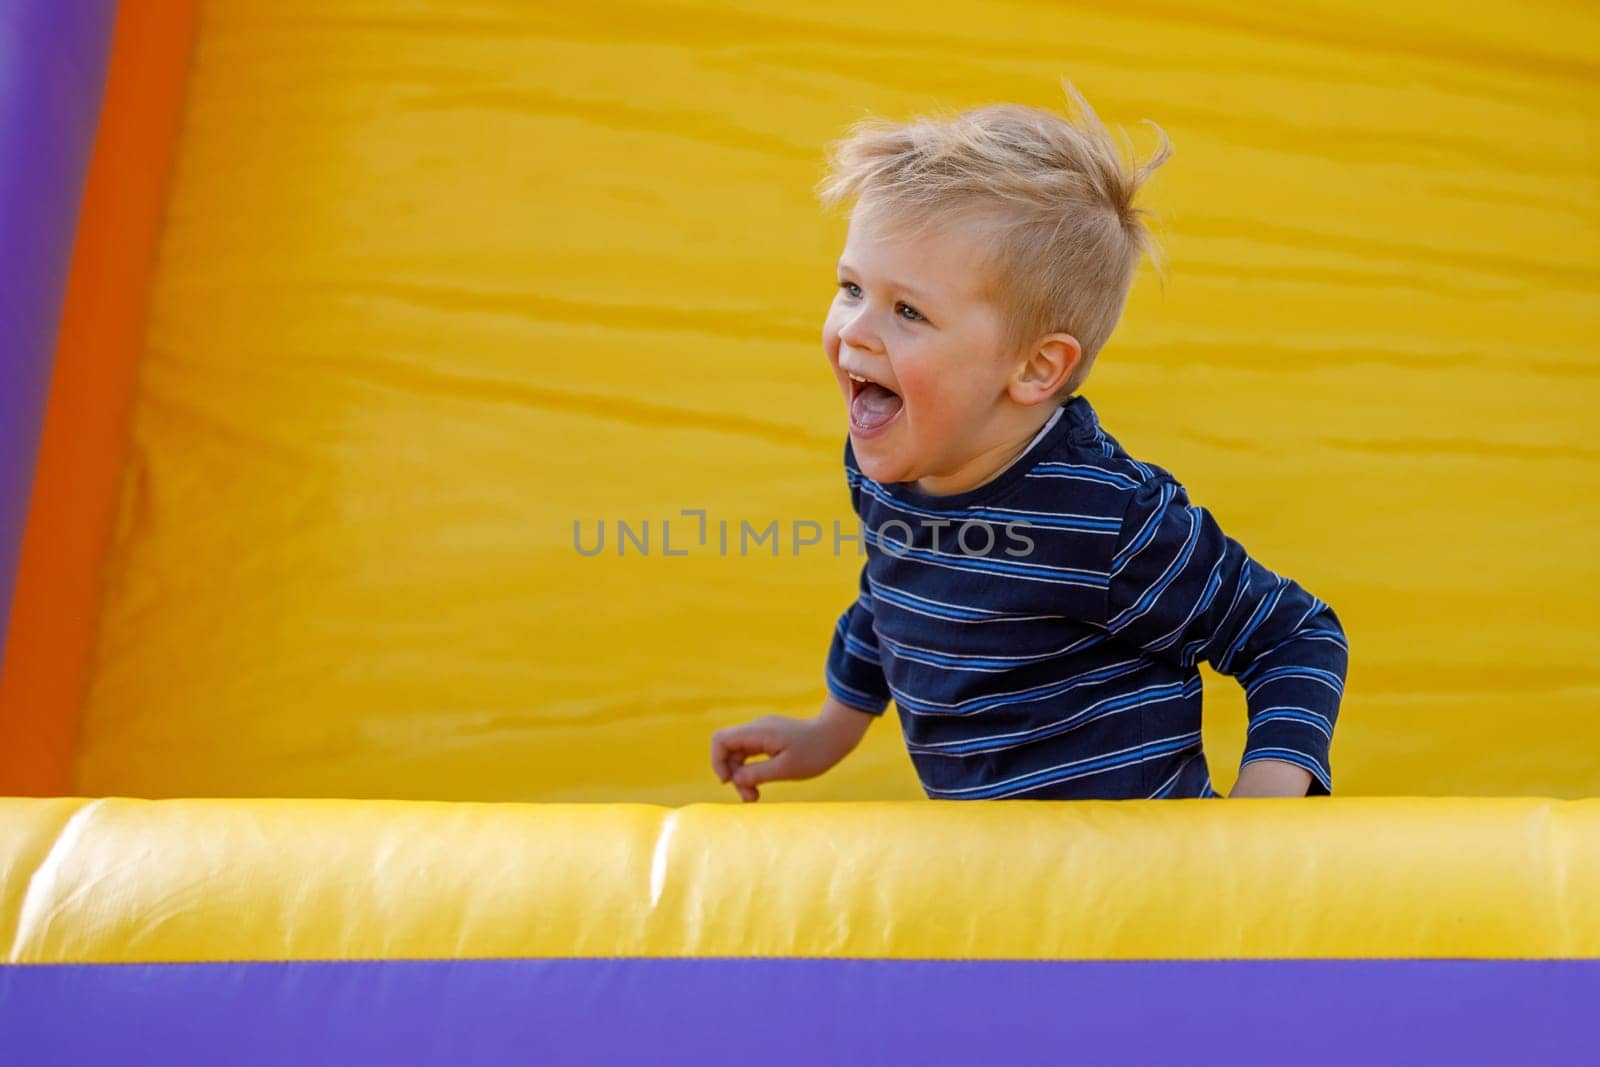 Stormy child be naughty on playground trampoline. Little cool boy have fun on a yellow inflatable trampoline. by Lincikas